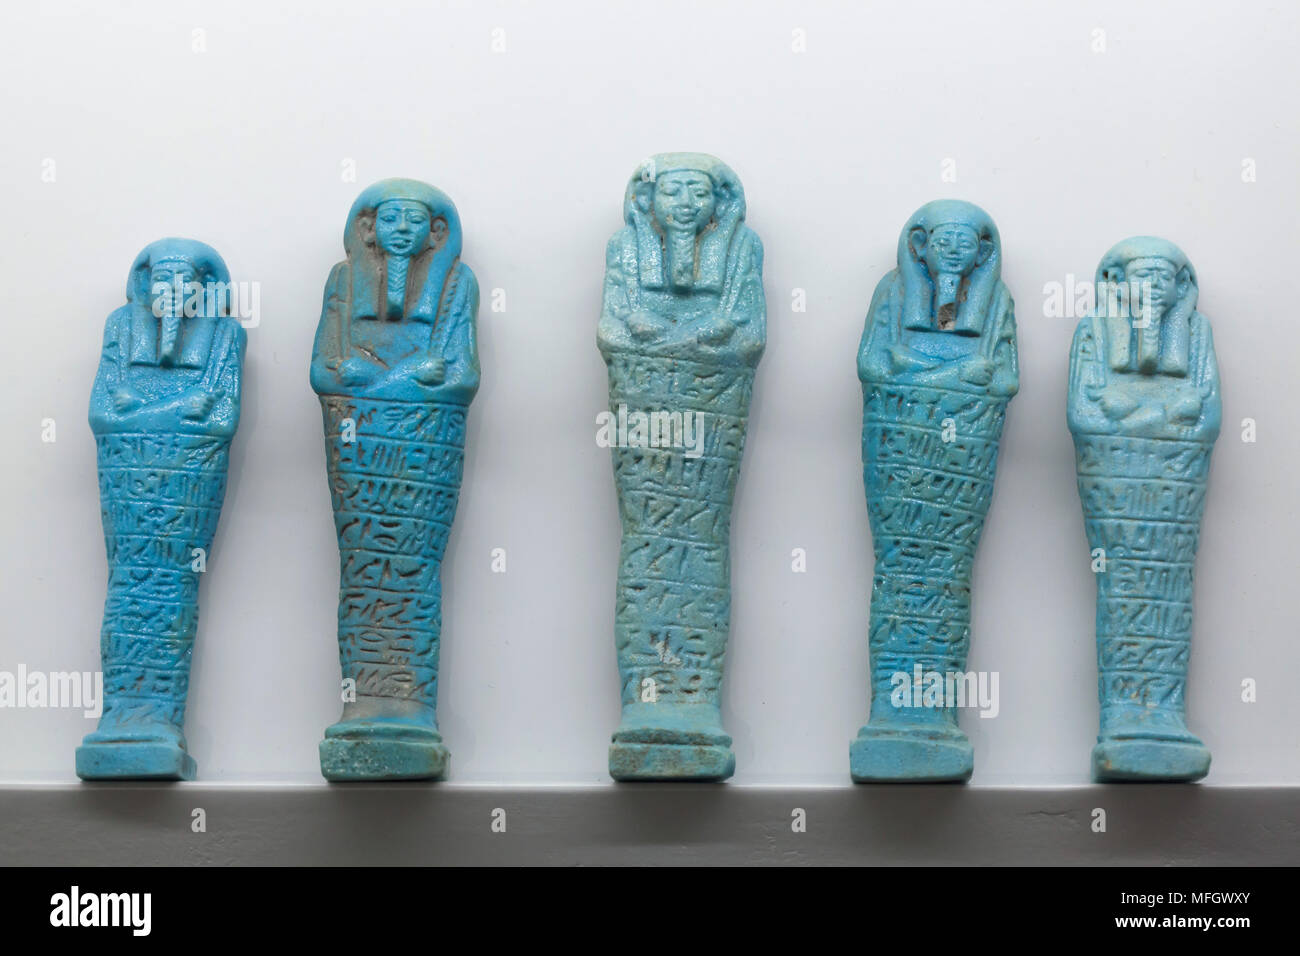 Ancient Egyptian ushabtis (funerary statuettes) dated from the late period of the 26th Dynasty (664-525 BC) on display in the National Archaeological Museum (Museo Archeologico Nazionale di Napoli) in Naples, Campania, Italy. Stock Photo